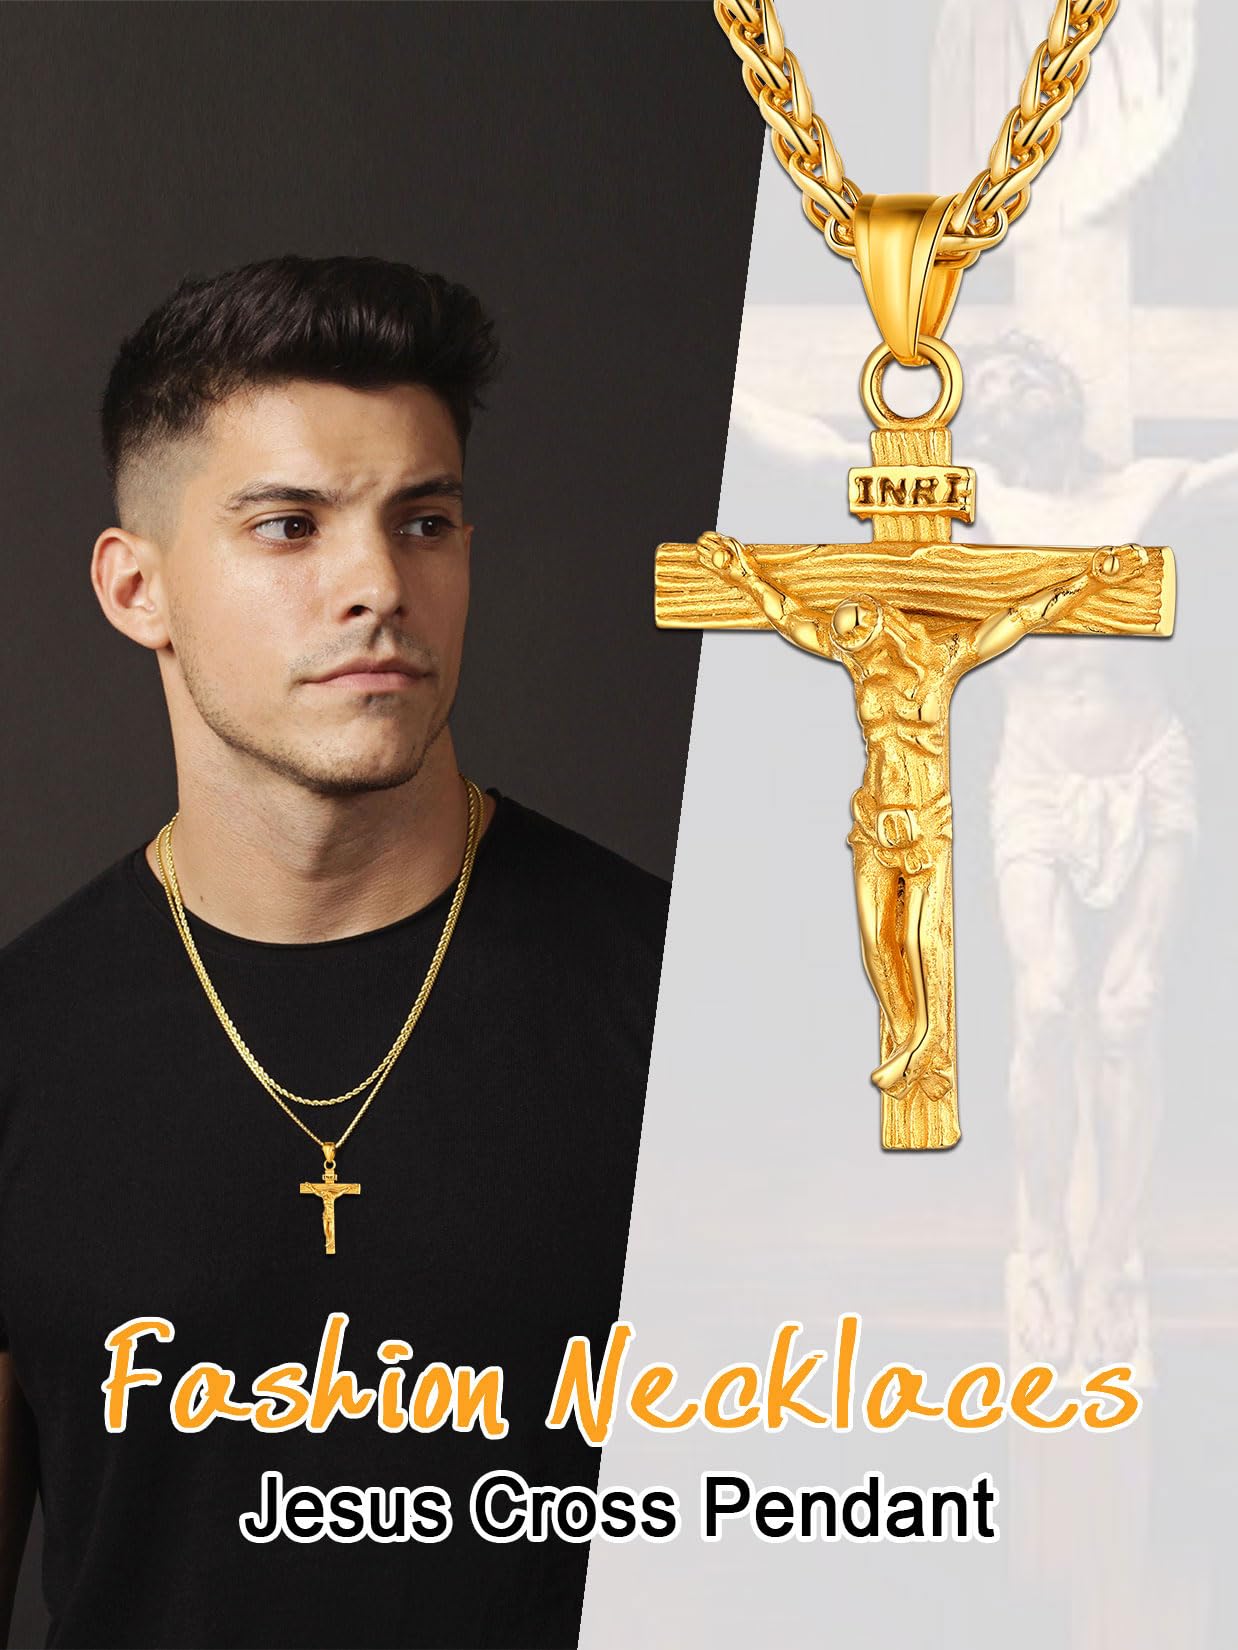 U7 Men Crucifix Cross Pendant with Chain Baptism Christian Jewelry Stainless Steel/18K Gold Antique Jesus Necklace, Gift Packed,Length 22